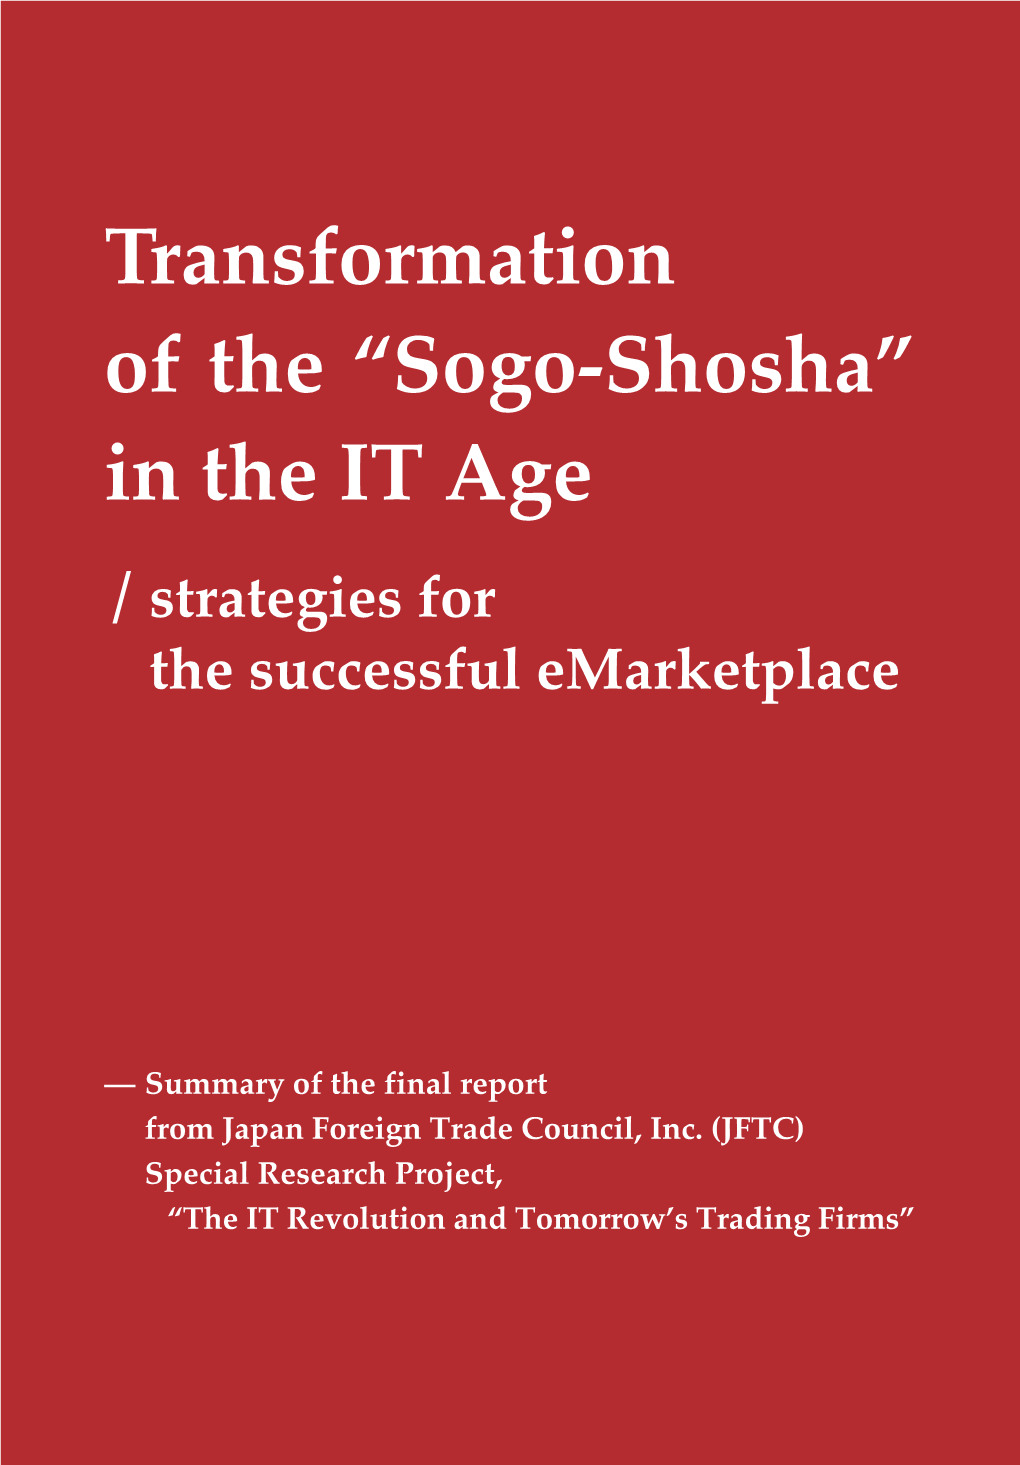 Transformation of the "Sogo-Shosha" in the IT